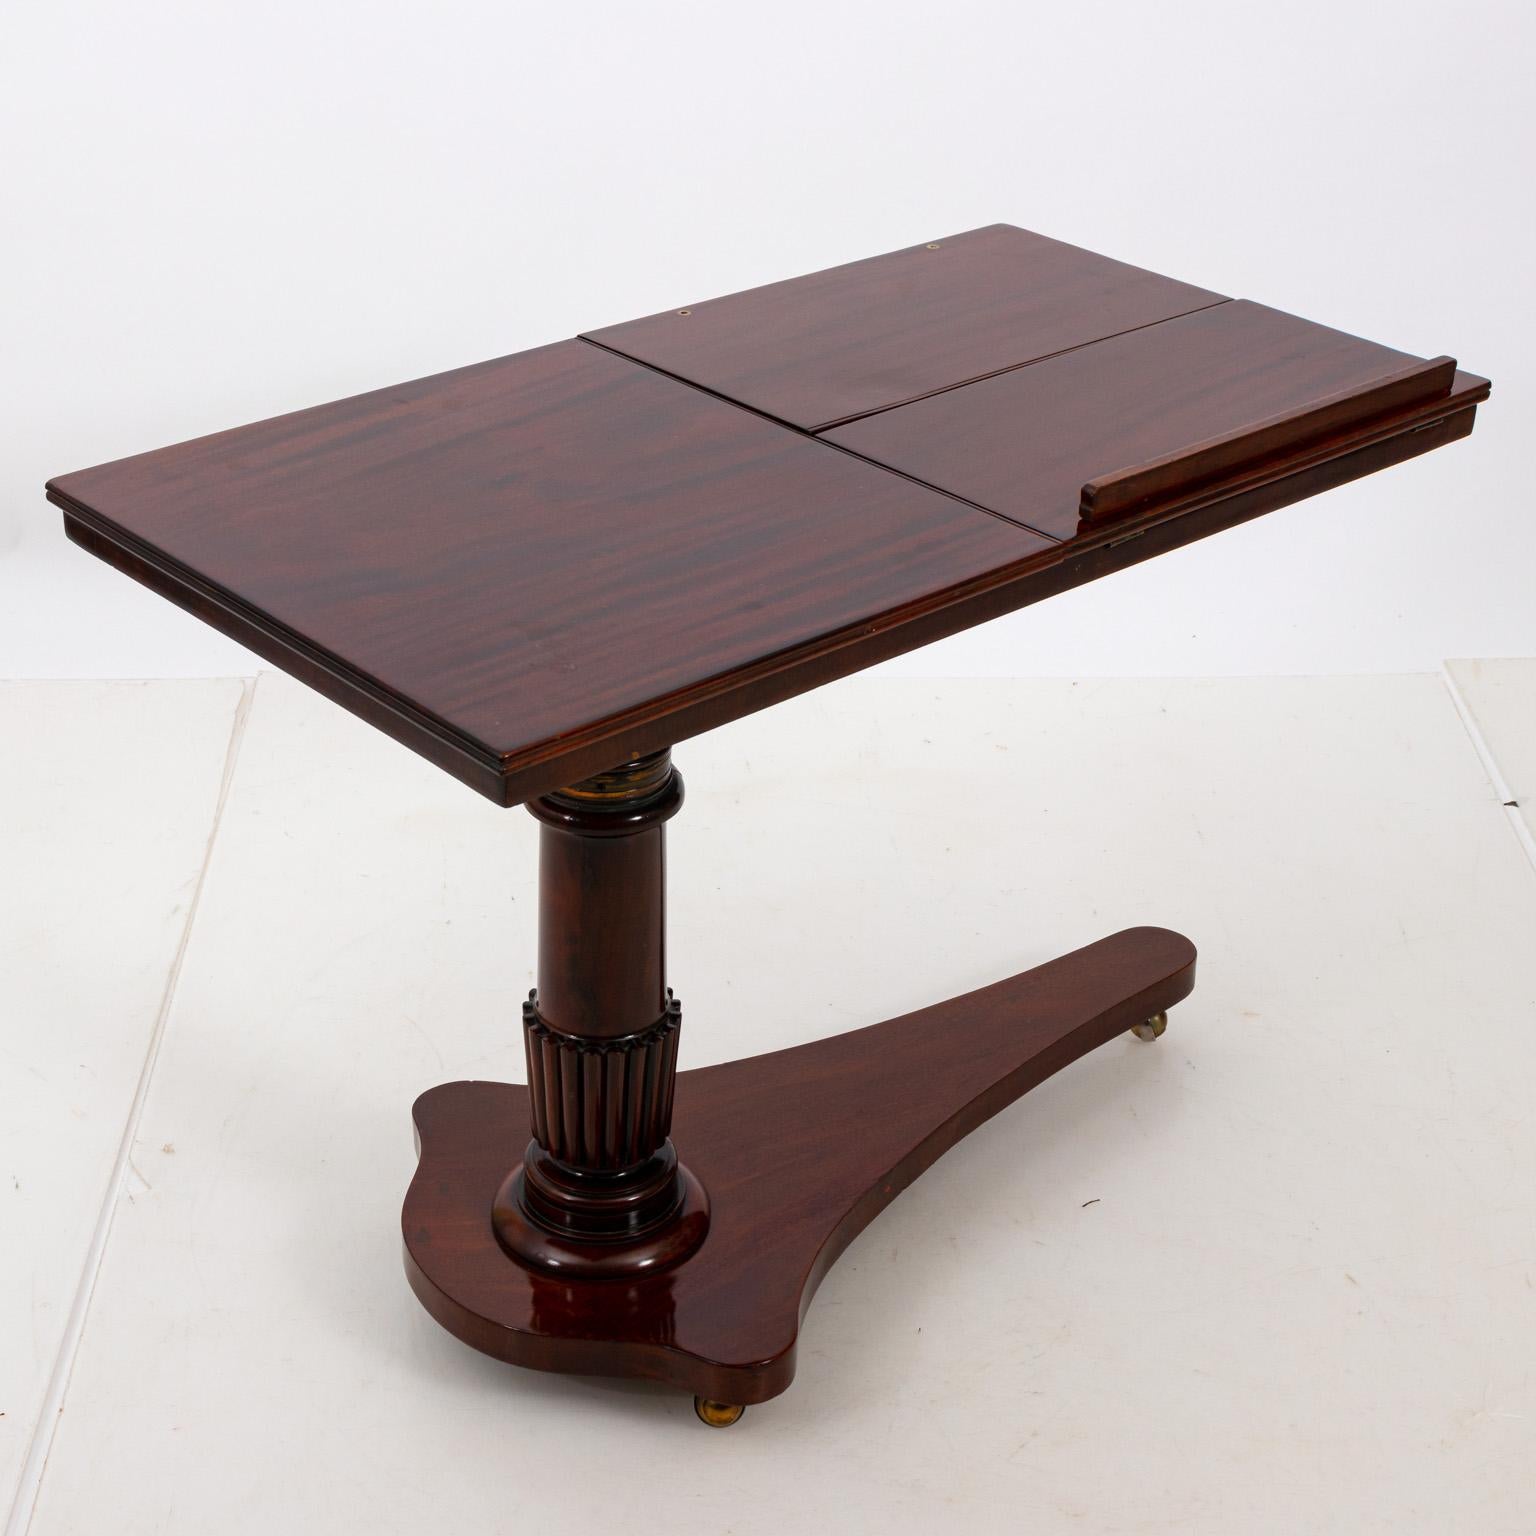 English mahogany pull up reading table on castors in the Georgian period style, circa 19th century. The piece also features an adjustable height along with two closable book stands and interchangeable book guard. Please note of wear consistent with